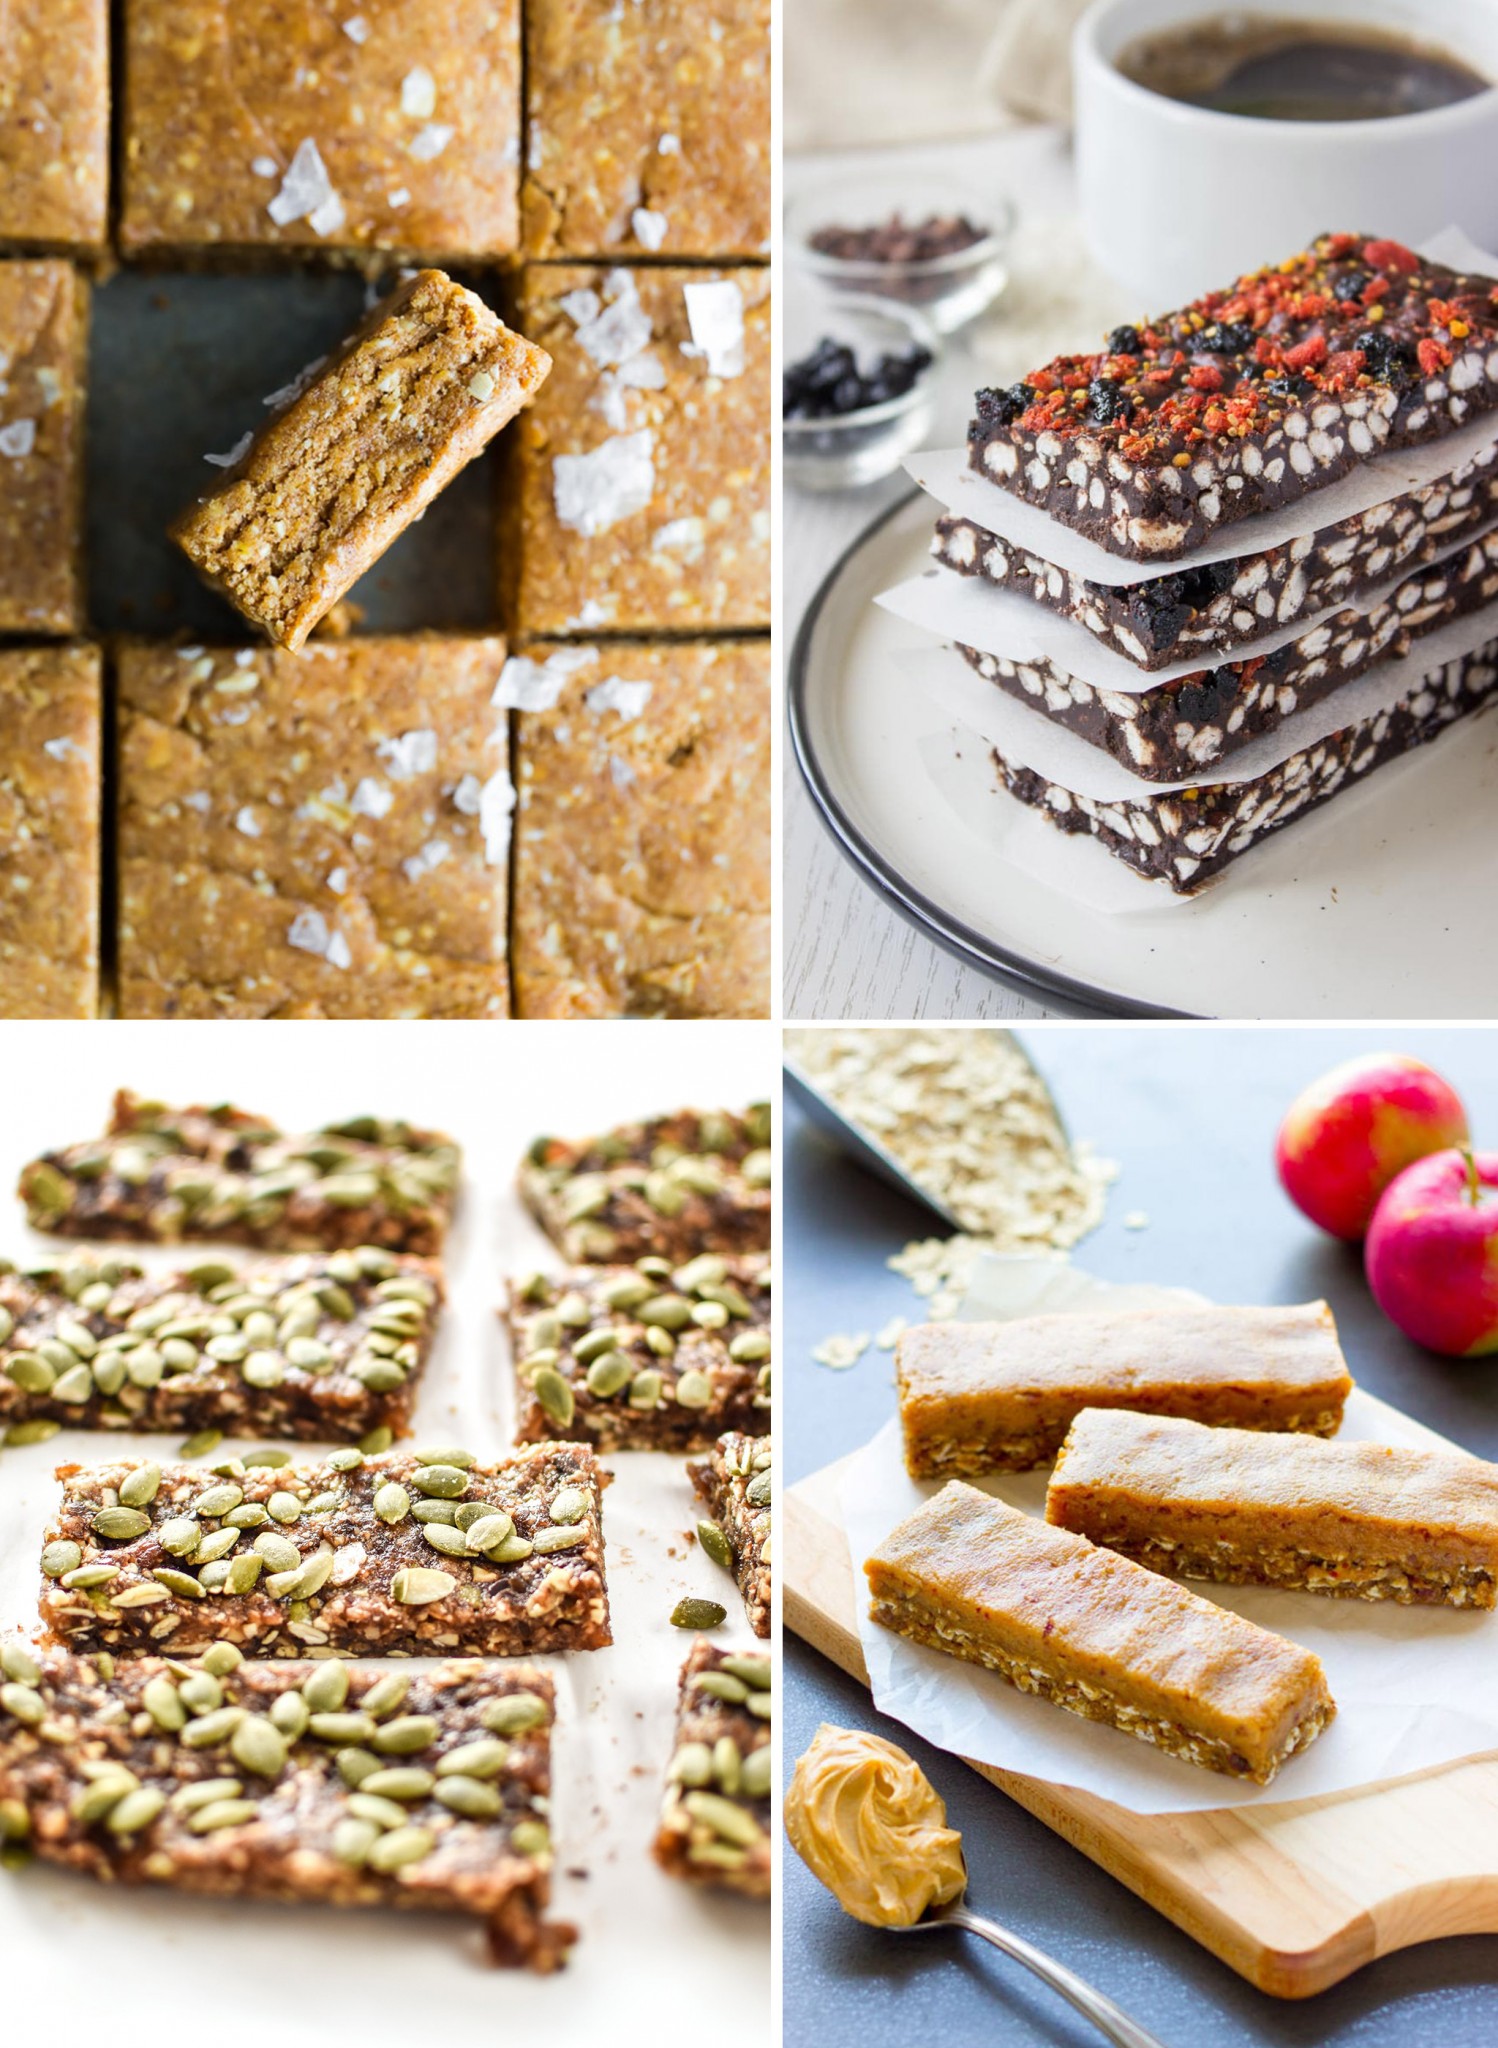 1 1 Healthy Snack Bars You Can Meal Prep COLLAGE 749x1024@2x 